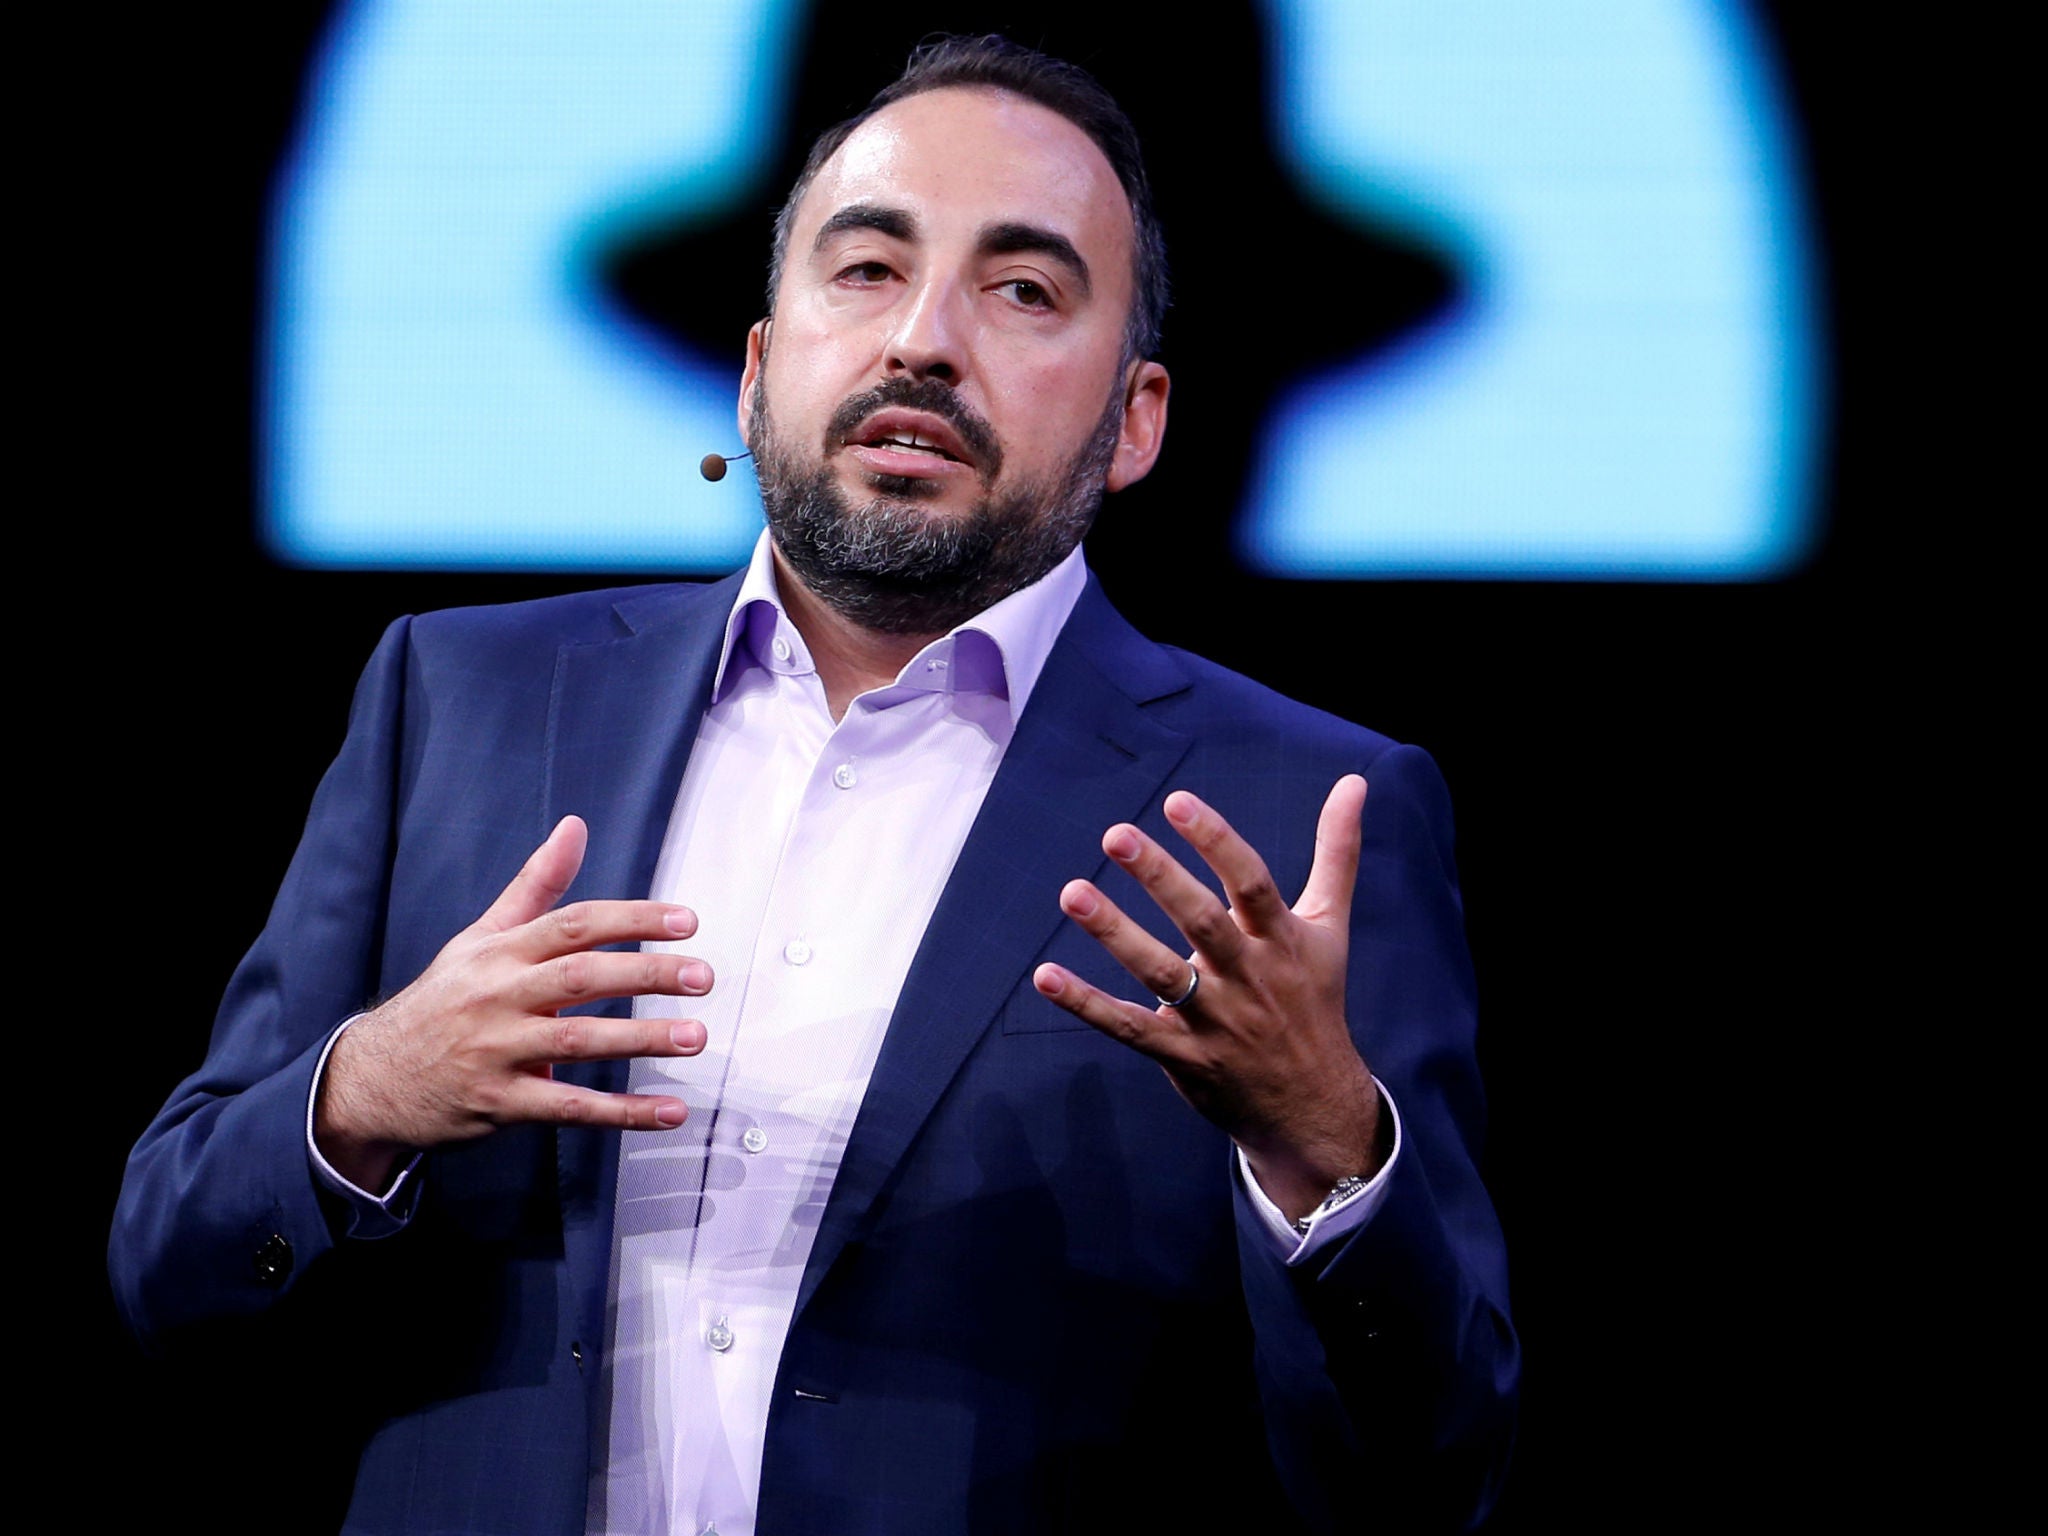 Facebook Chief Security Officer Alex Stamos addresses a conference in Las Vegas, Nevada